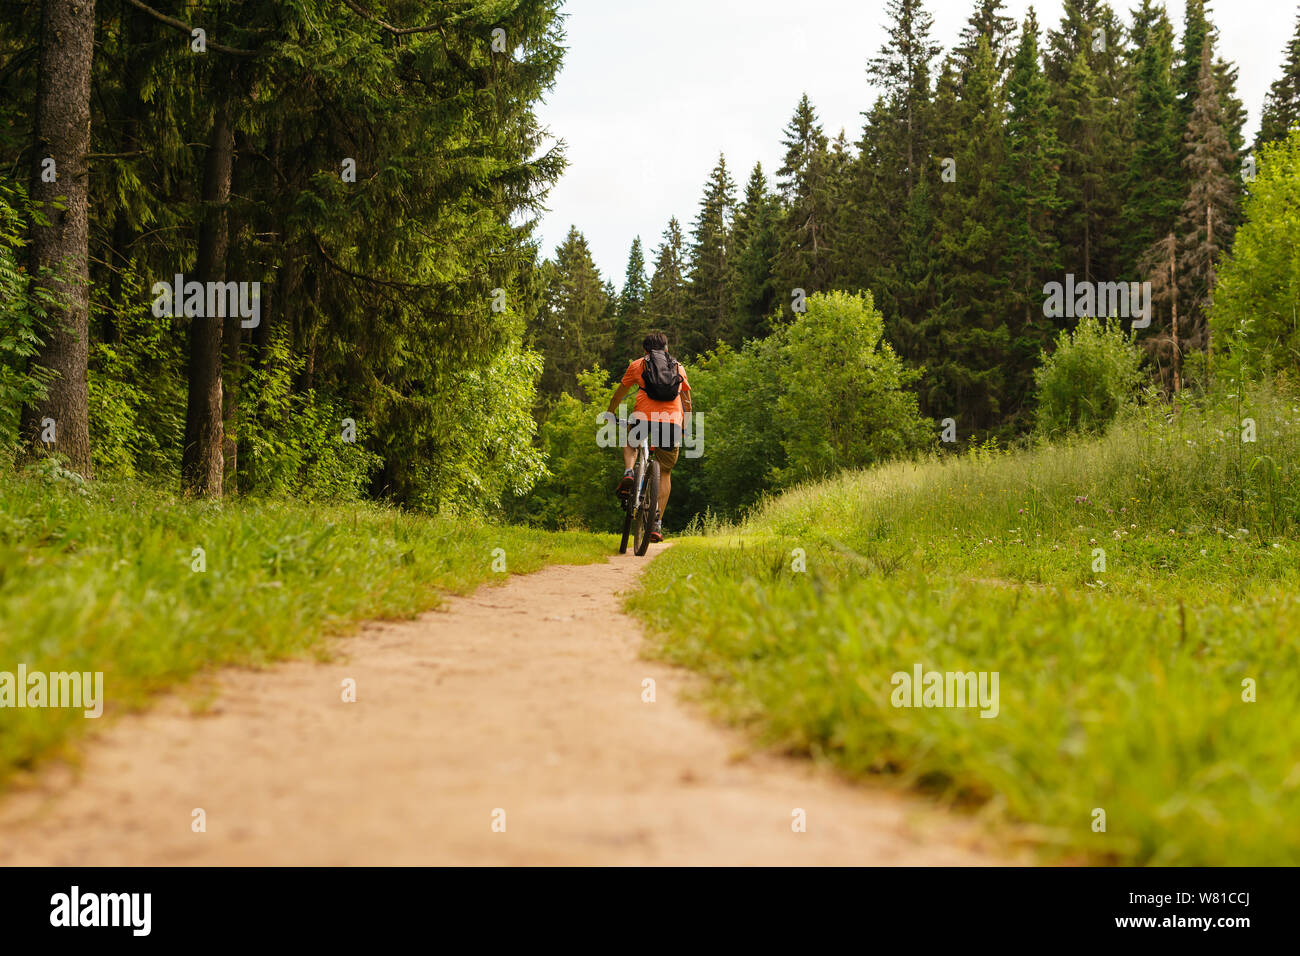 cyclist with a backpack on a mountain bike rides along a forest path Stock Photo